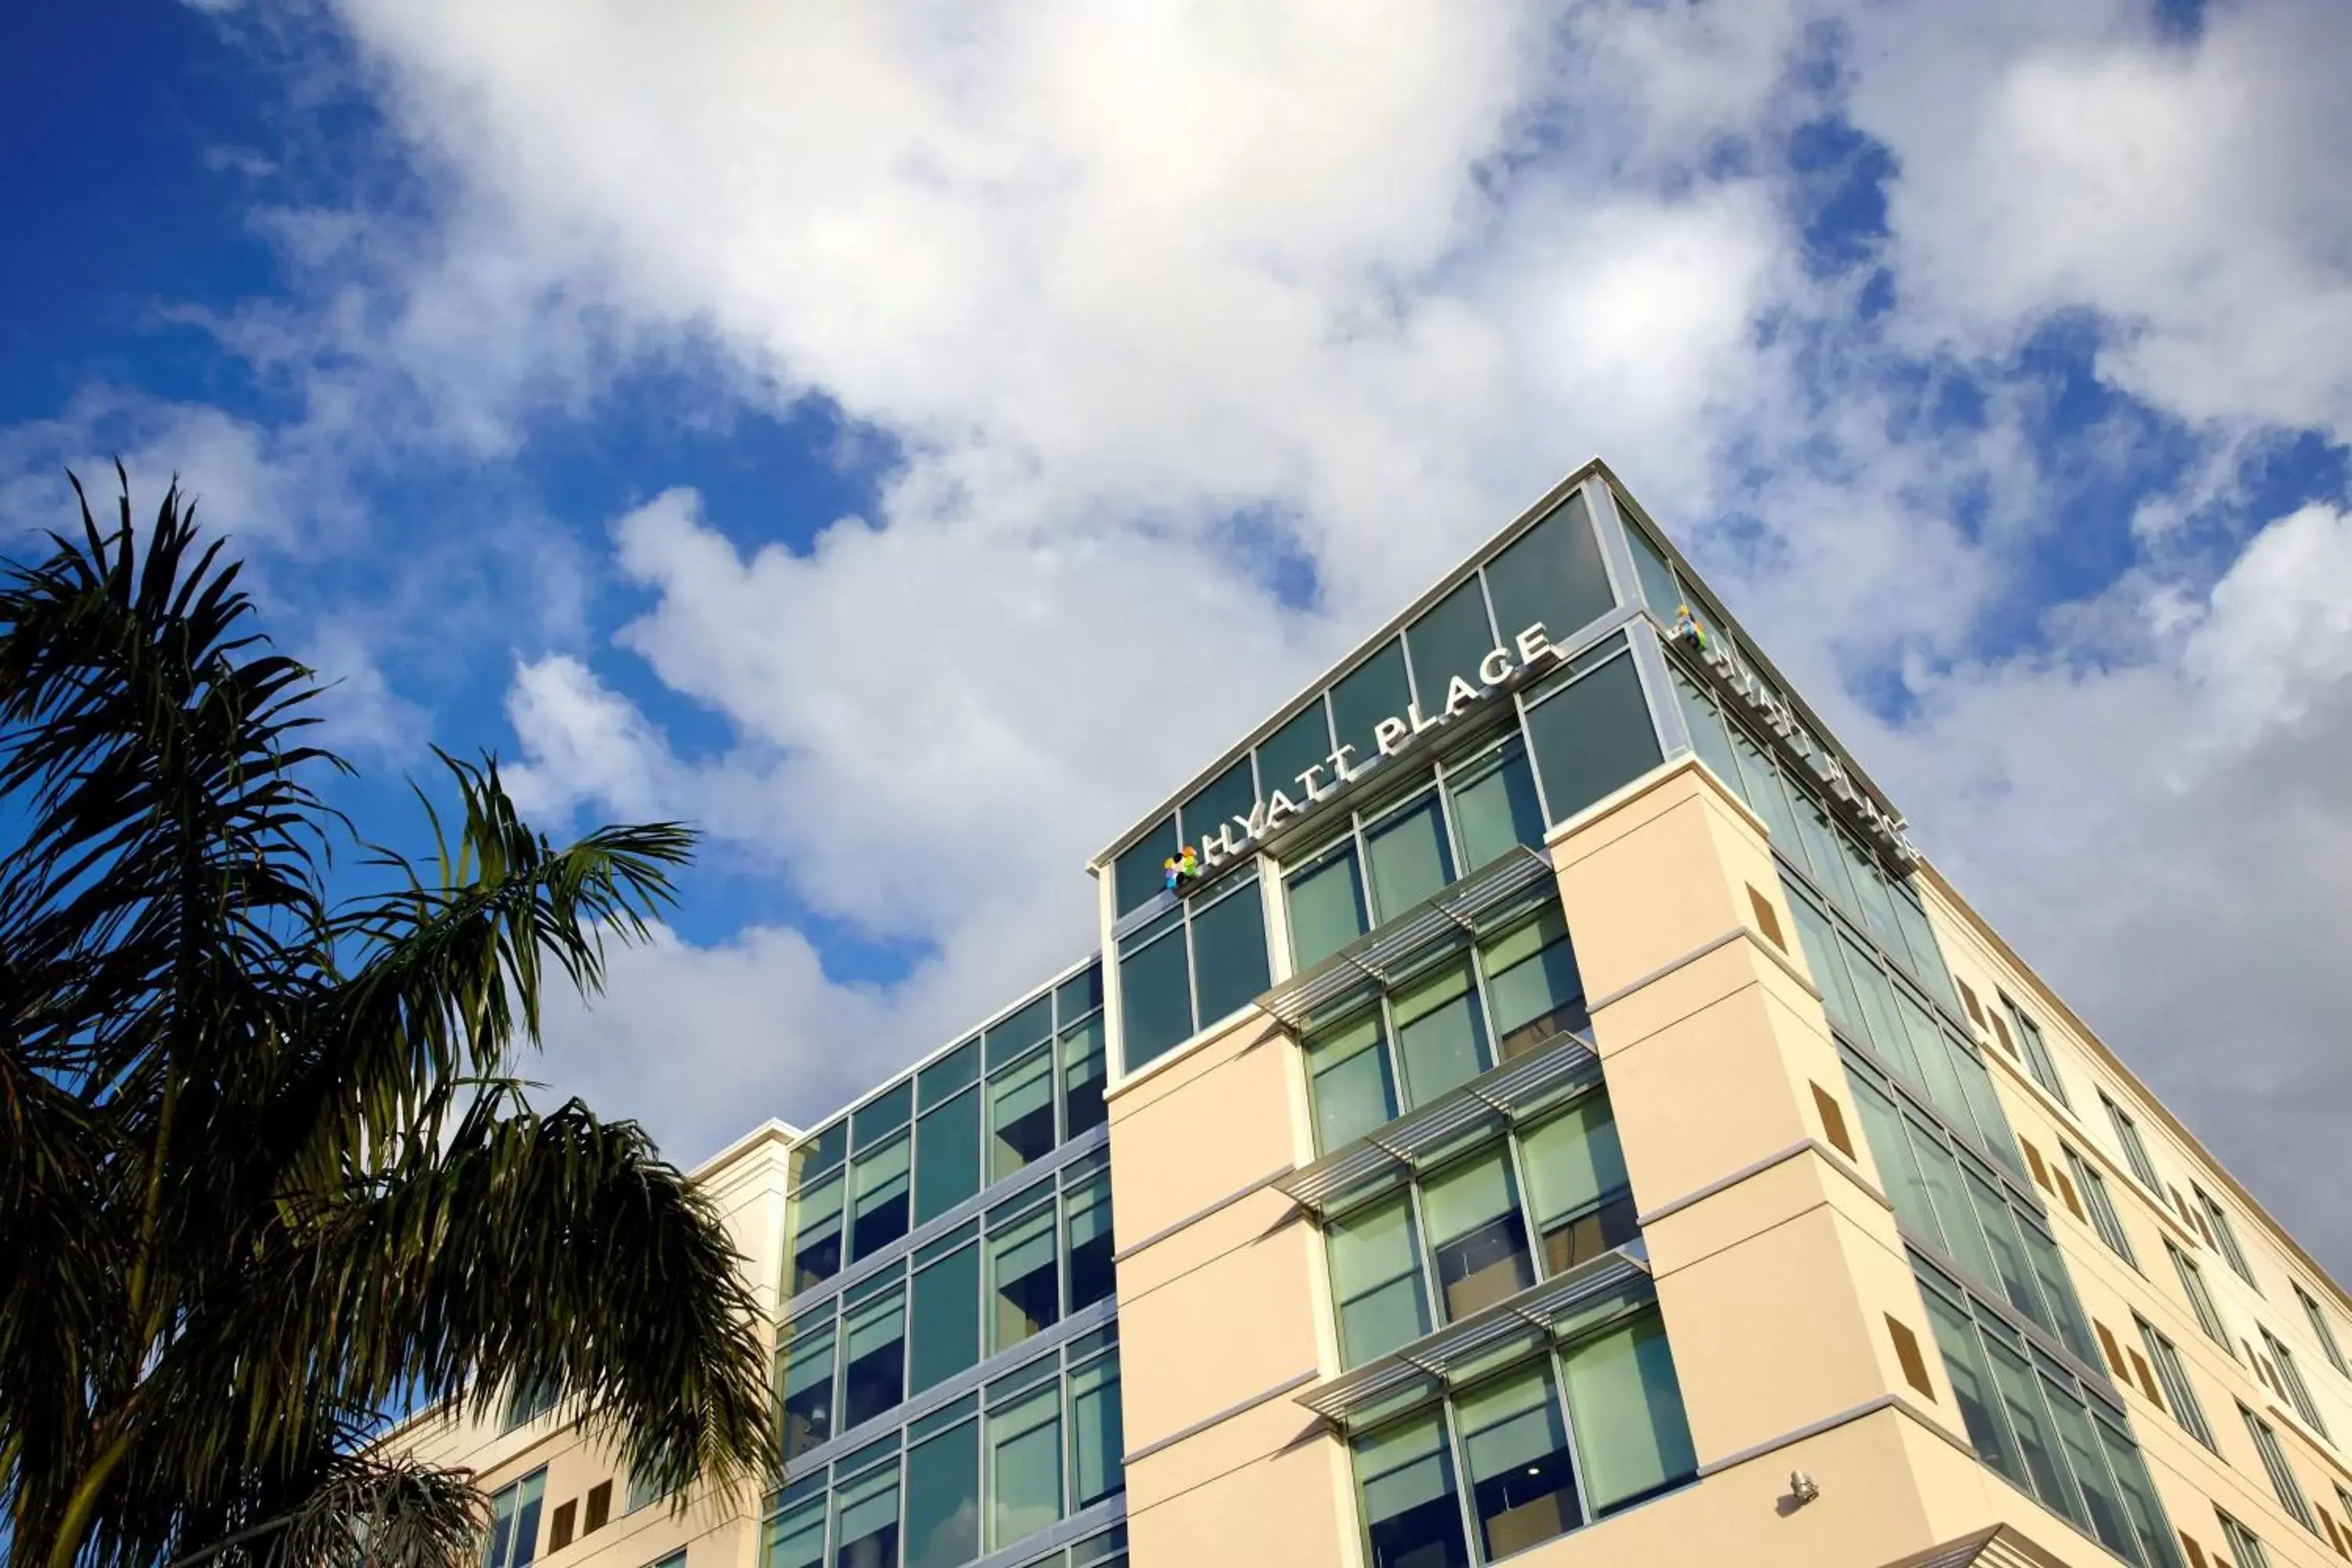 Property Building in Hyatt Place Miami Airport East